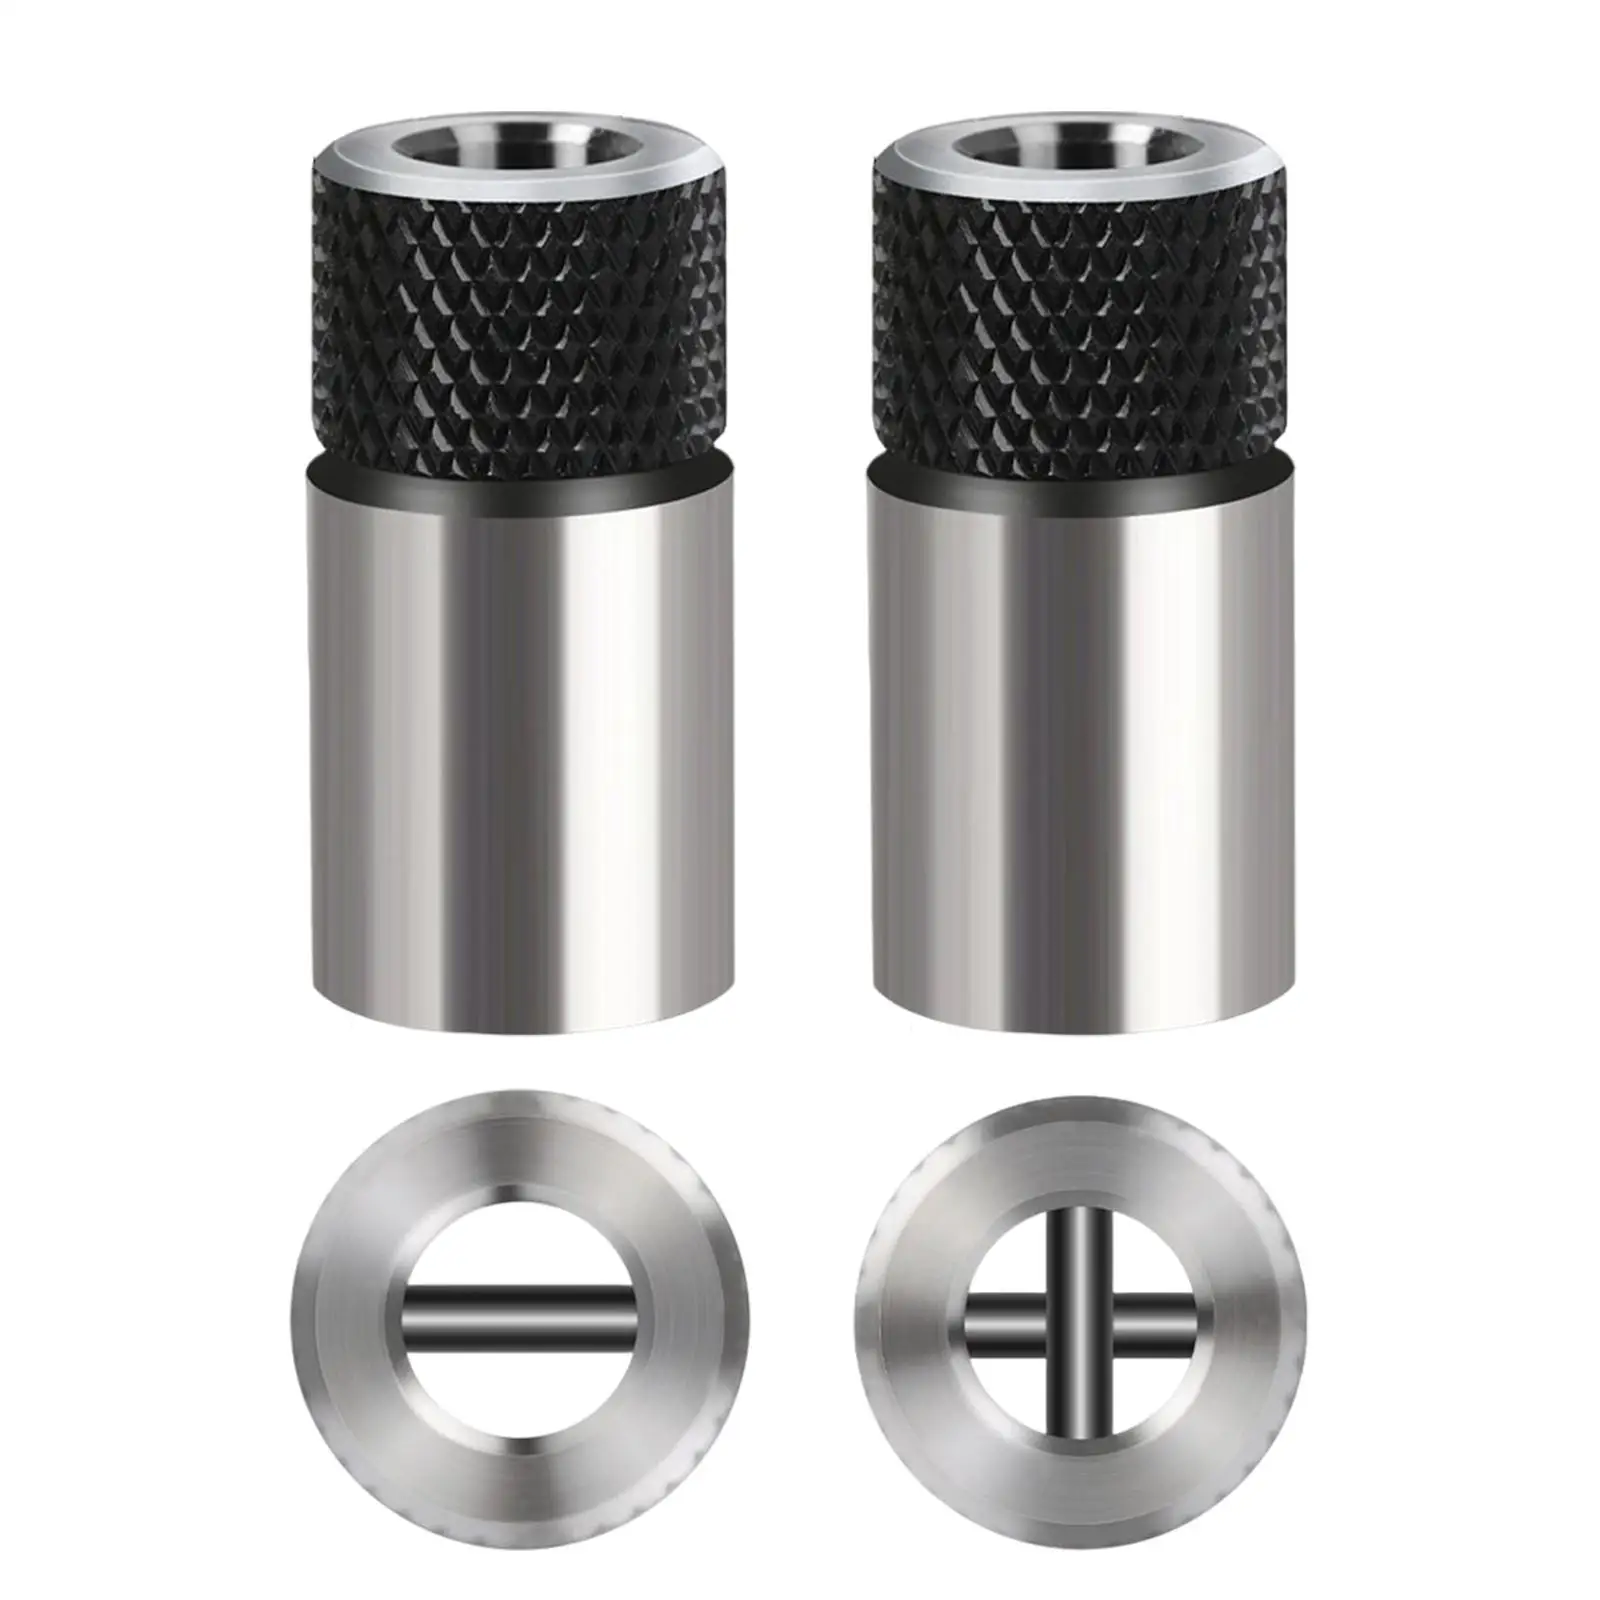 Universal Quick Change Keyless Chuck Drill Accessories Carbon Steel Drill Chuck High Precision Collet Chuck Adapter